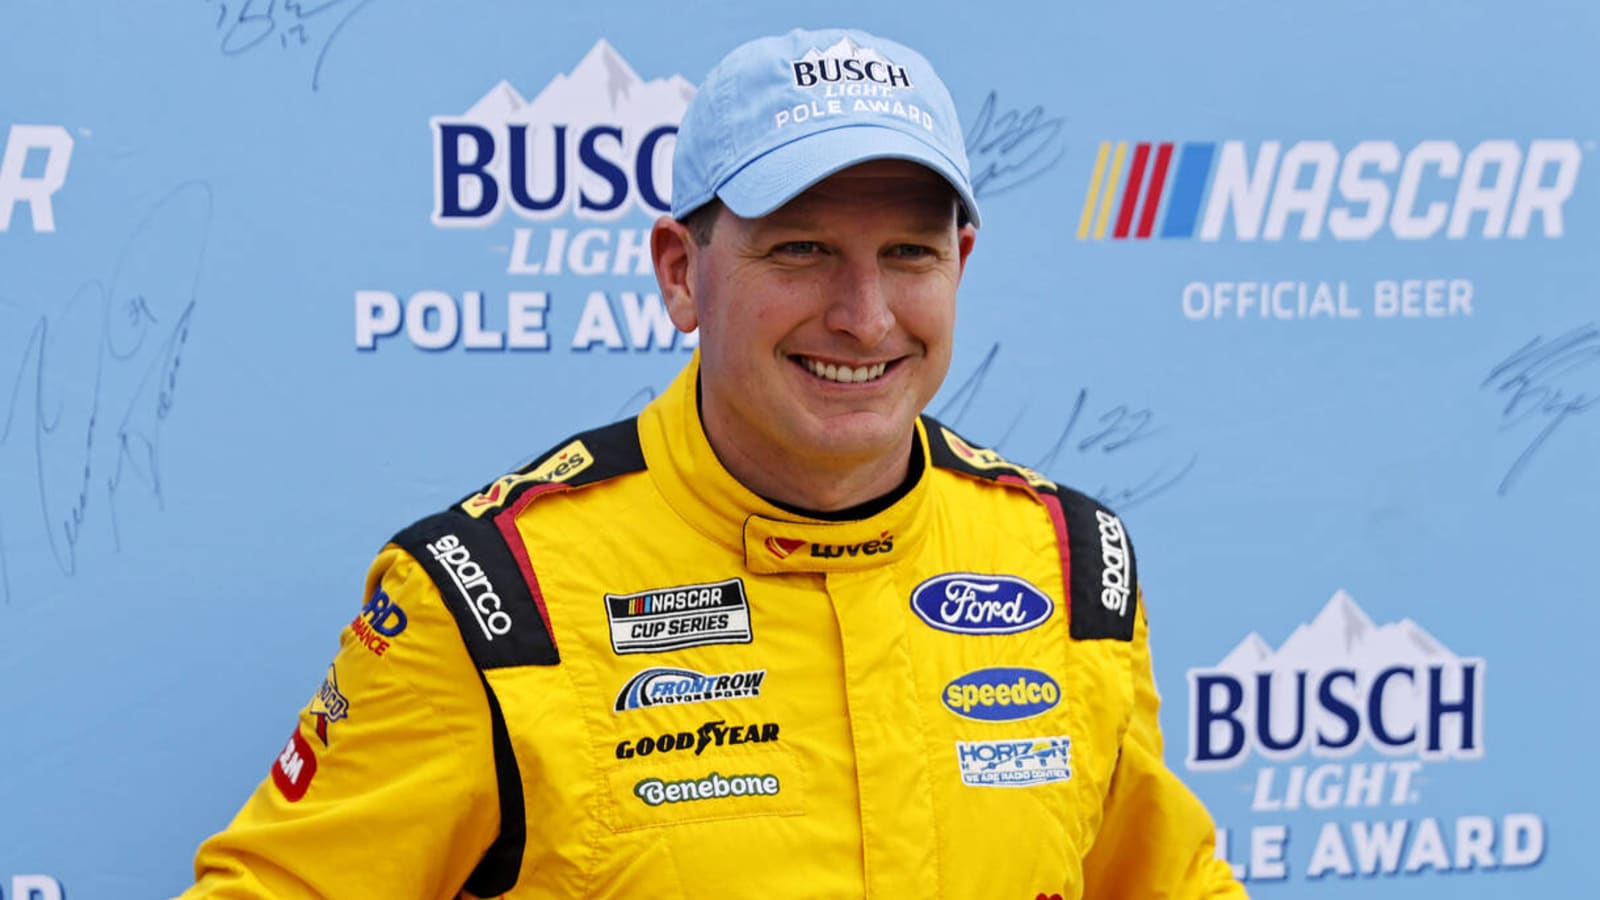 McDowell's departure from Front Row Motorsports is confusing